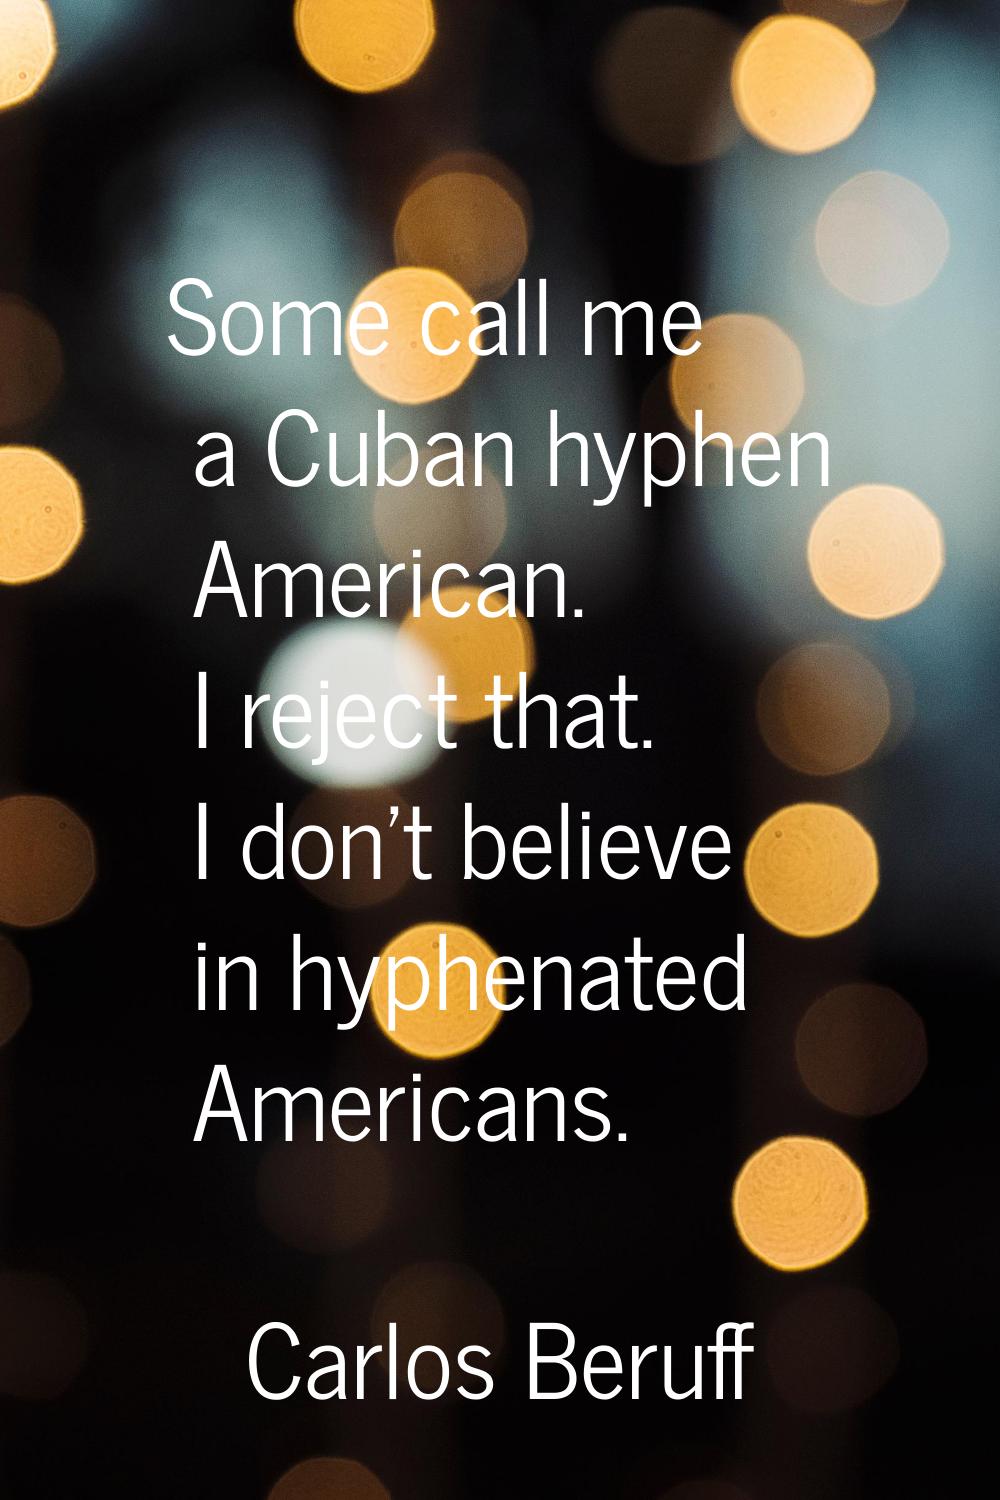 Some call me a Cuban hyphen American. I reject that. I don't believe in hyphenated Americans.